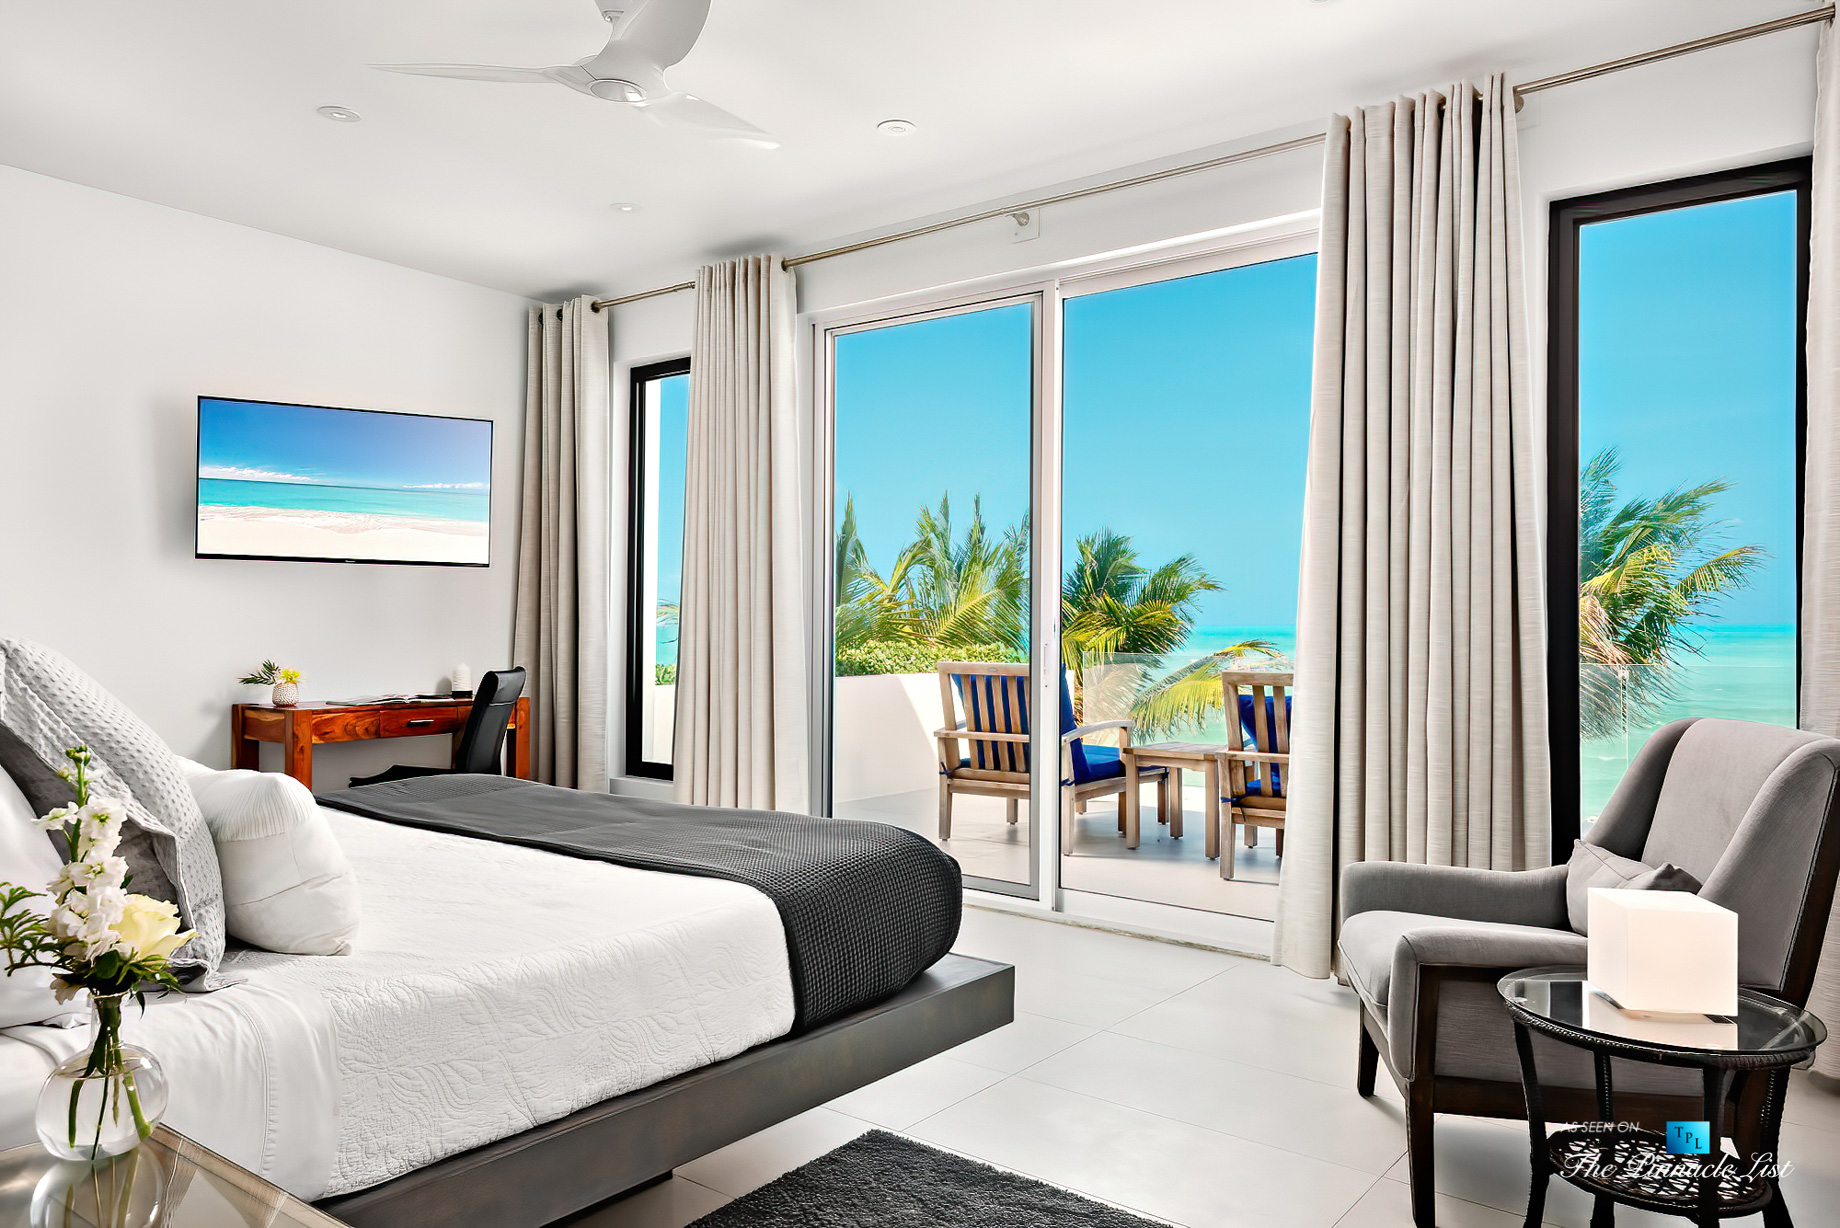 Tip of the Tail Luxury Villa – Providenciales, Turks and Caicos Islands – Master Bedroom and Deck